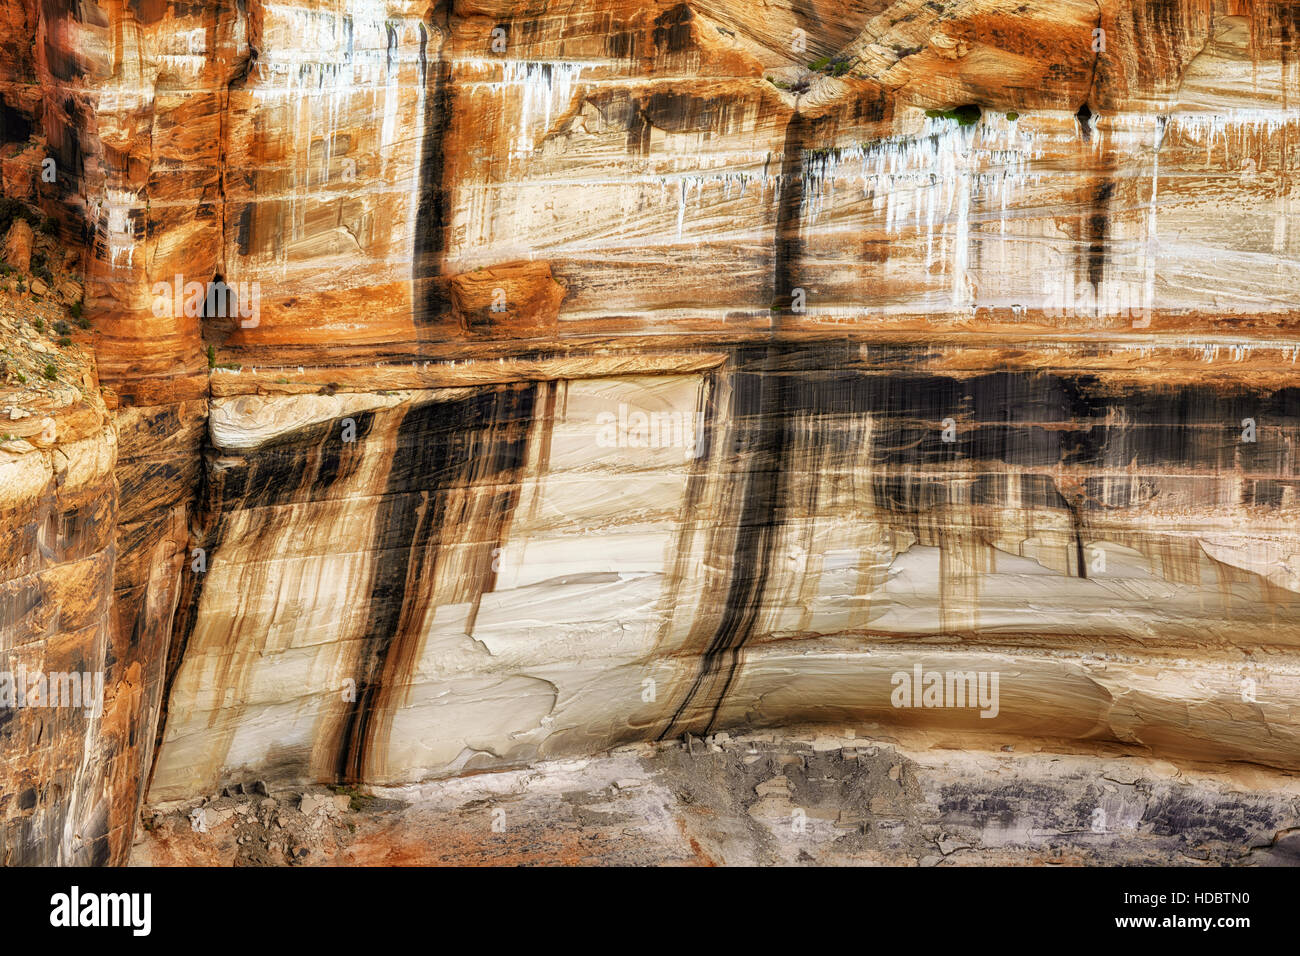 Sliding House Ruins remain at the base of colorful desert varnish walls in Arizona’s Canyon de Chelly National Monument. Stock Photo